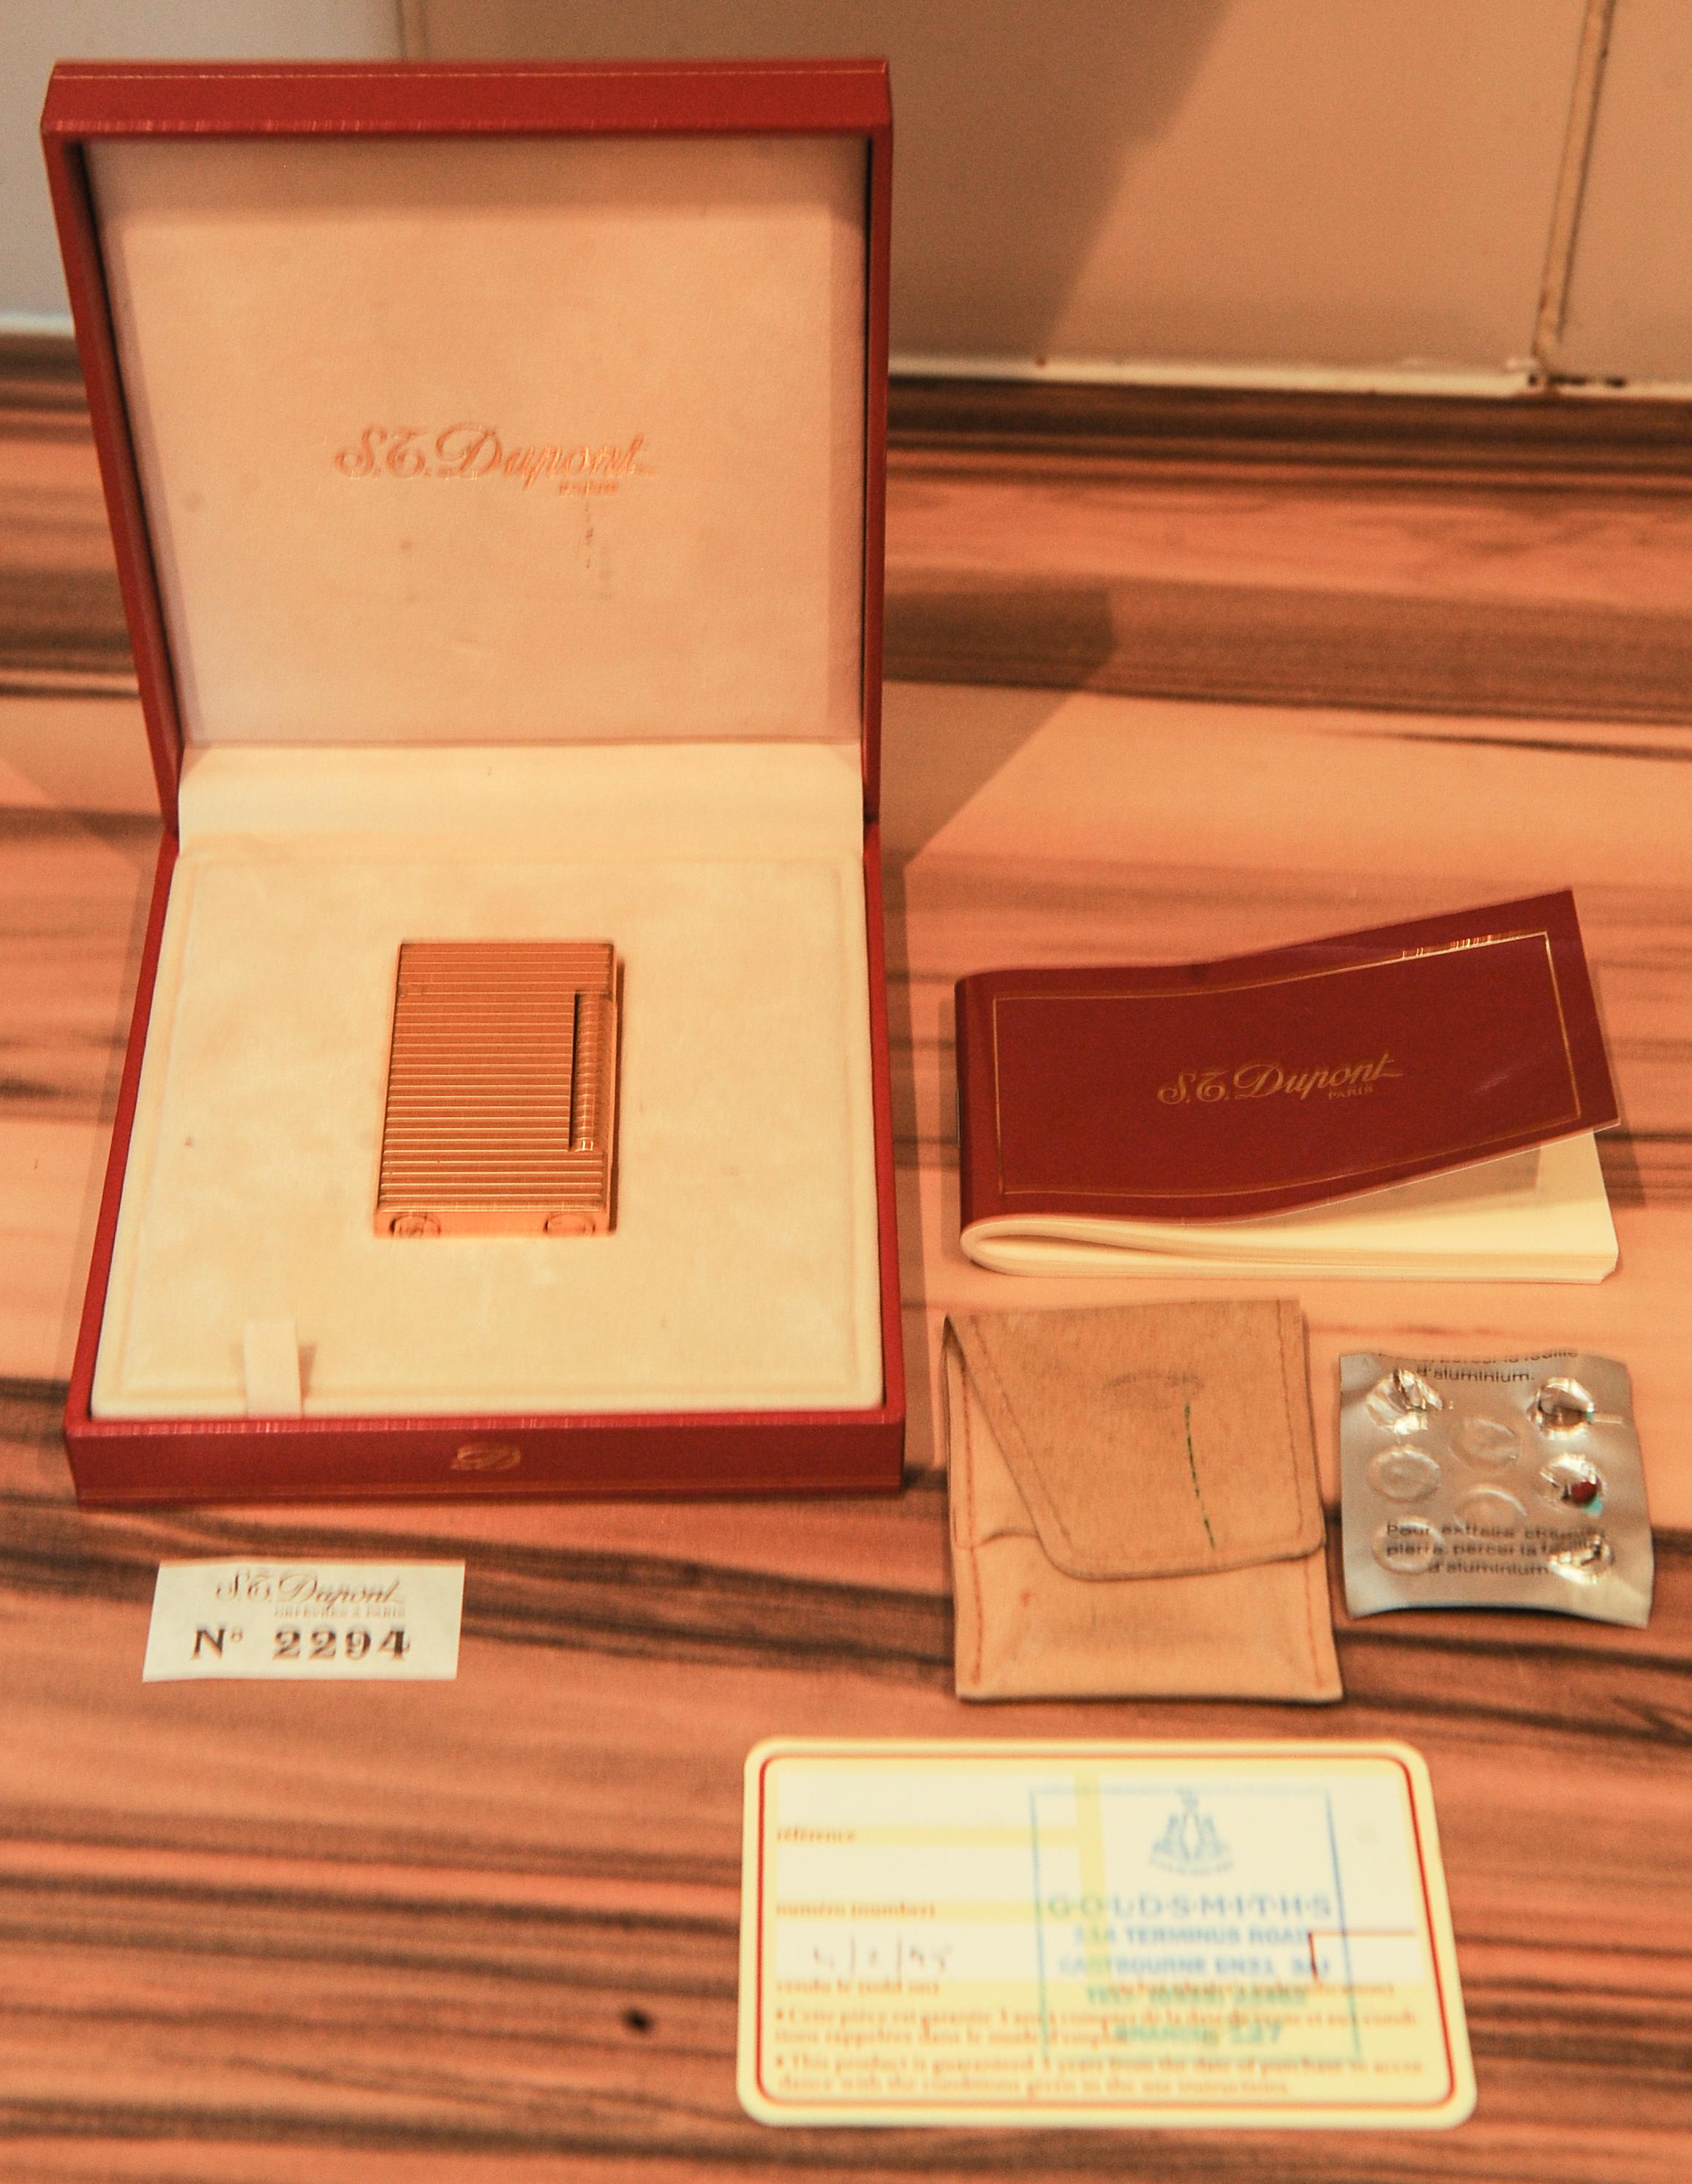 S.T. Dupont Briquet De Poche LD Plaque Gas Cigarette Lighter With Original Box  In Good Condition For Sale In High Wycombe, GB